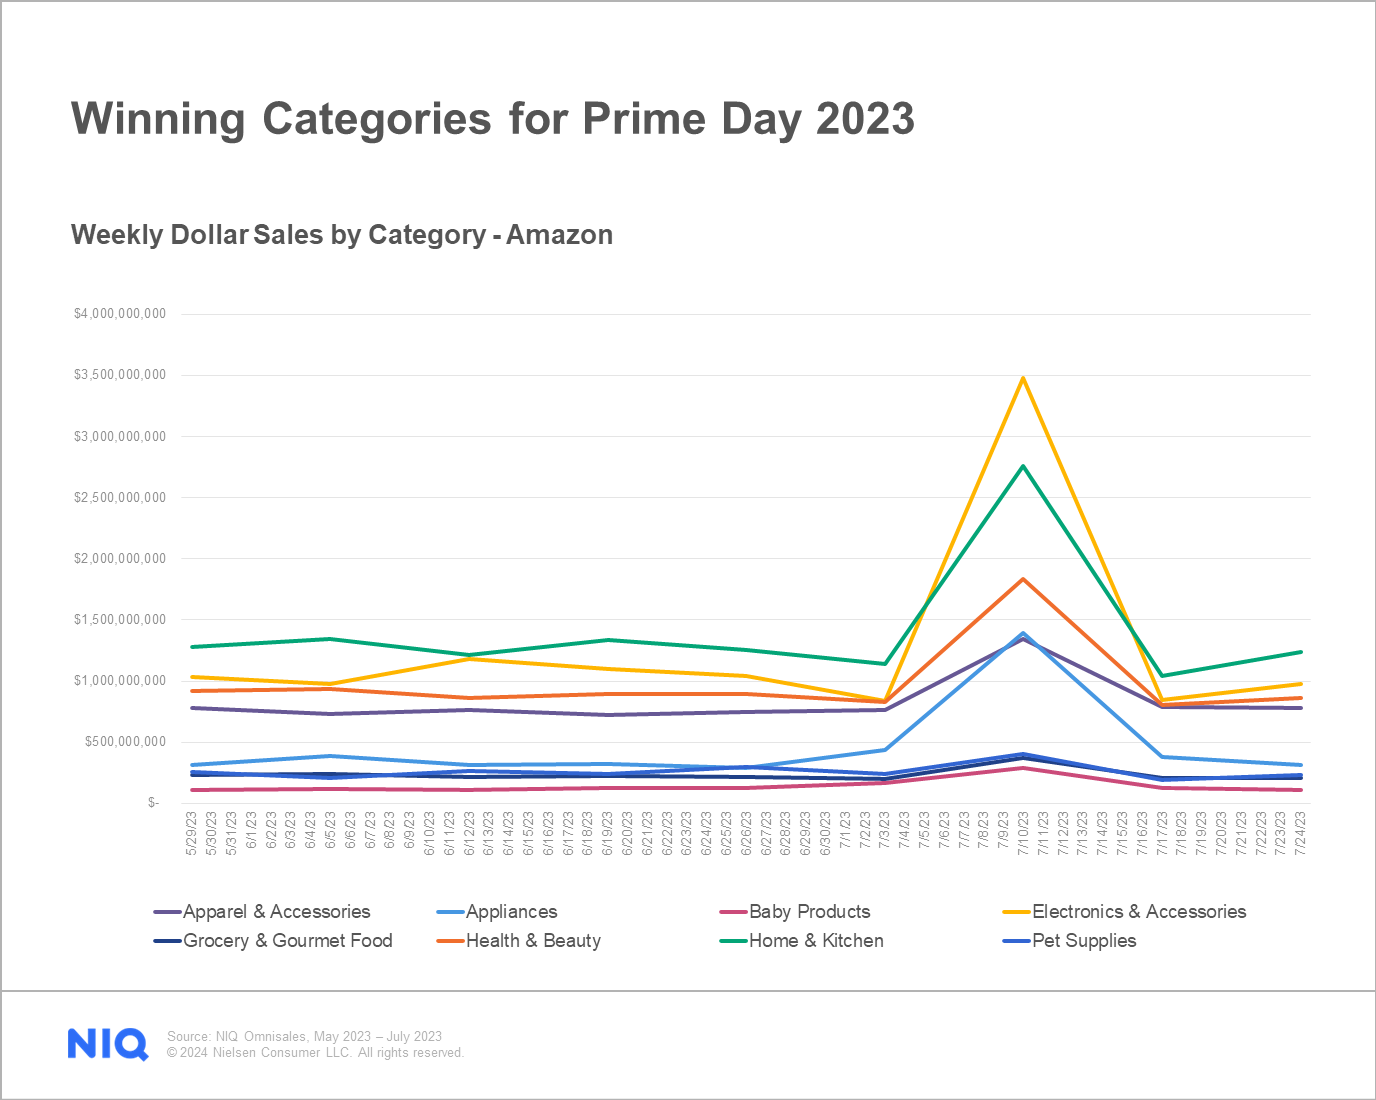 Weekly Dollar Sales by Category - Amazon